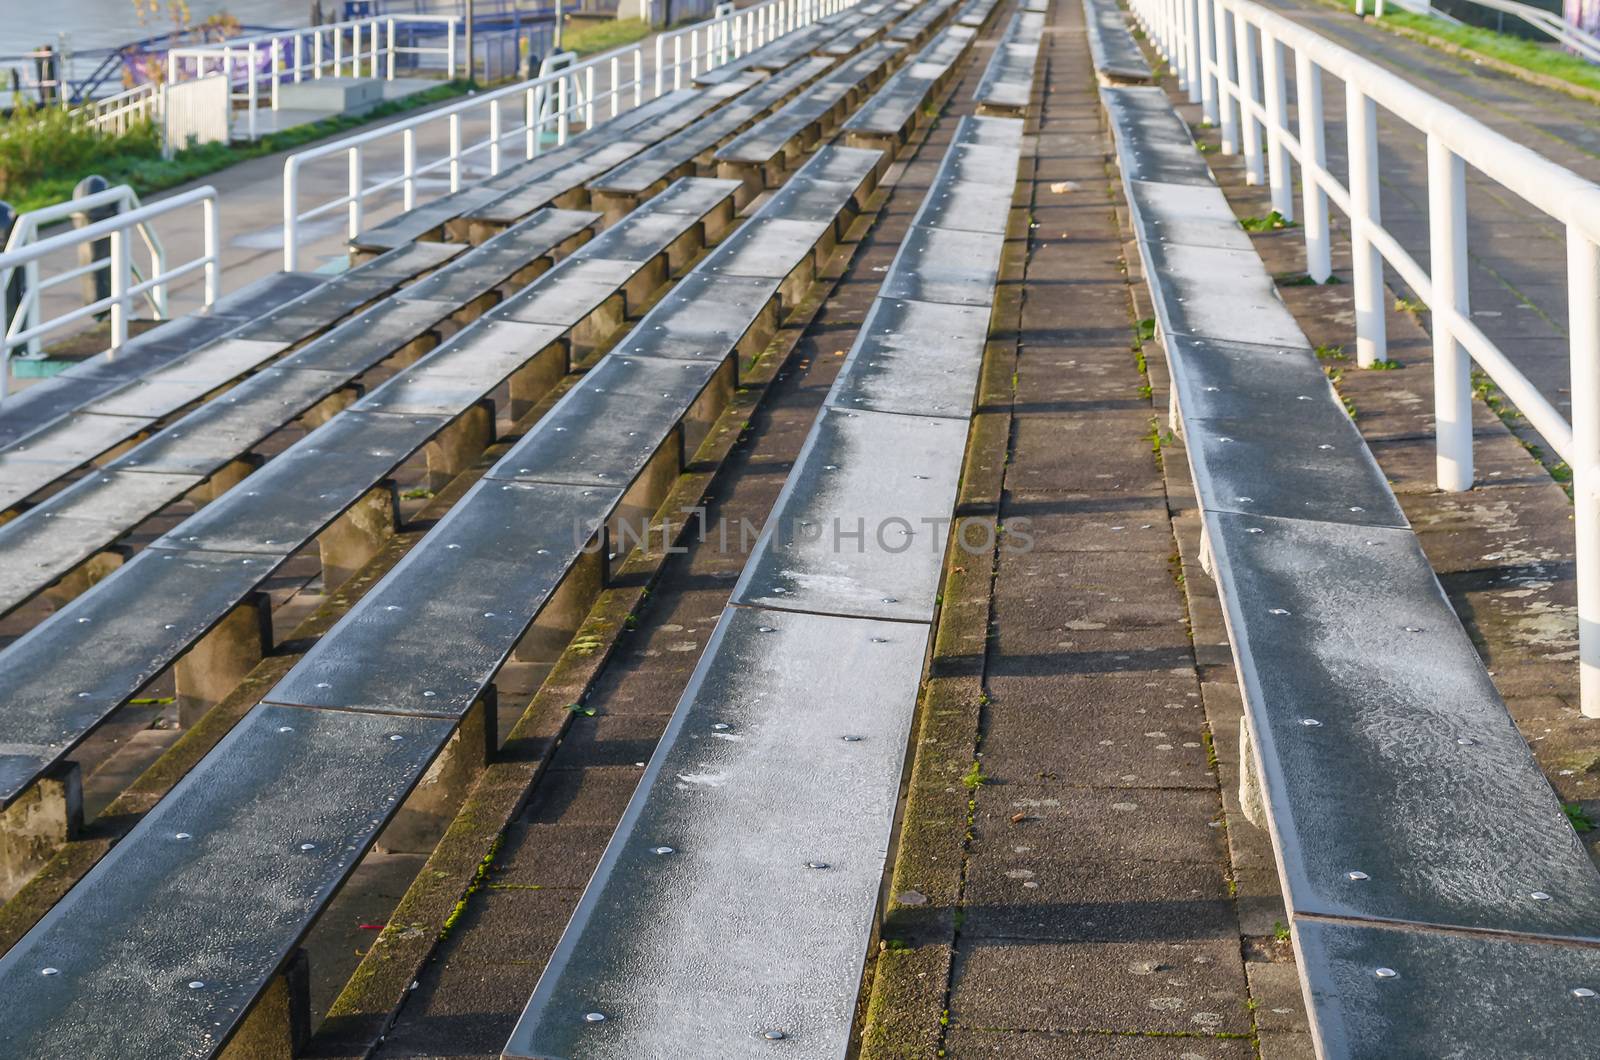 Long rows of seats by JFsPic